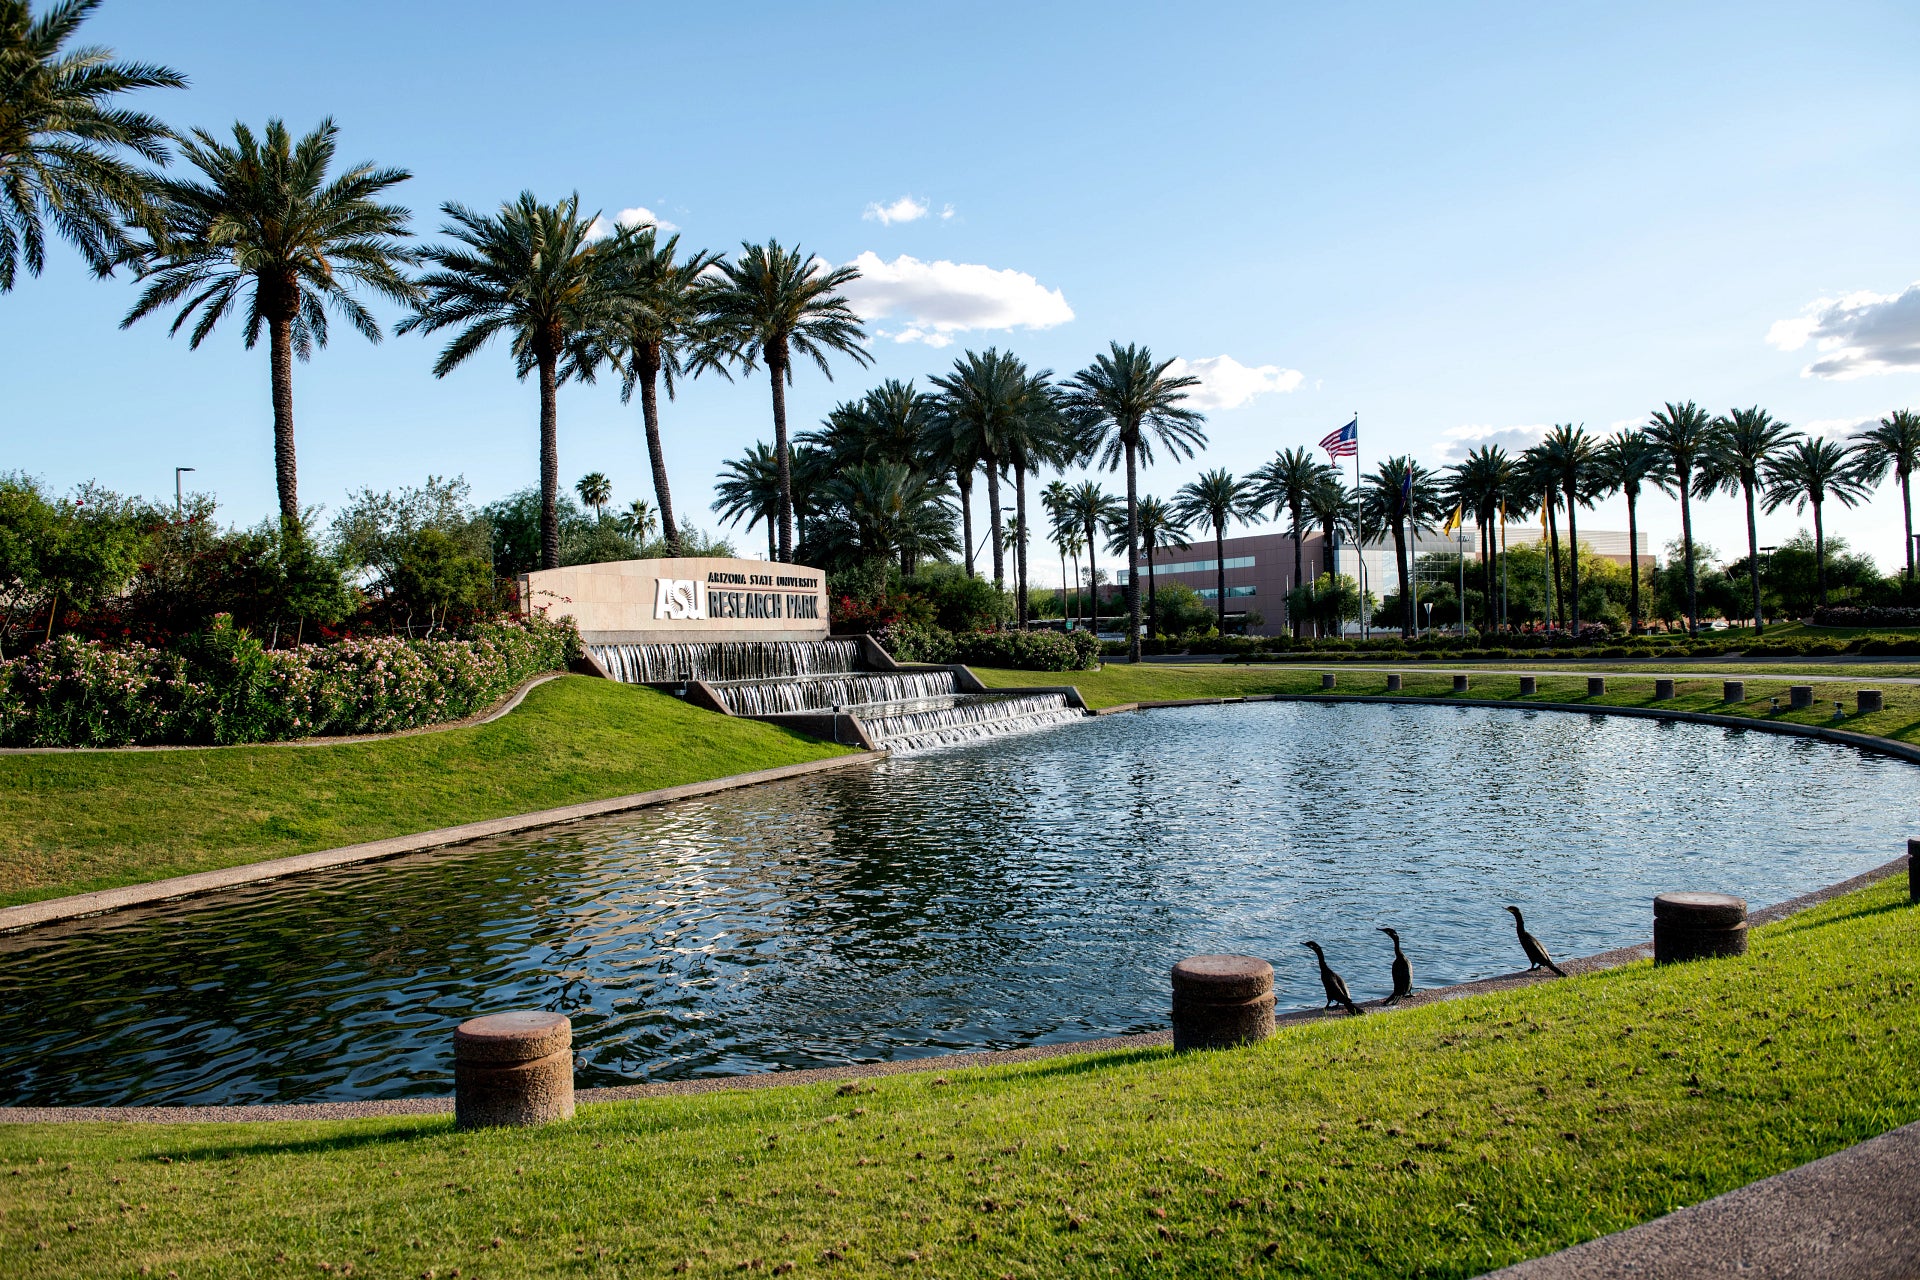 Image of the pond and palm trees in front of the ASU Research Park